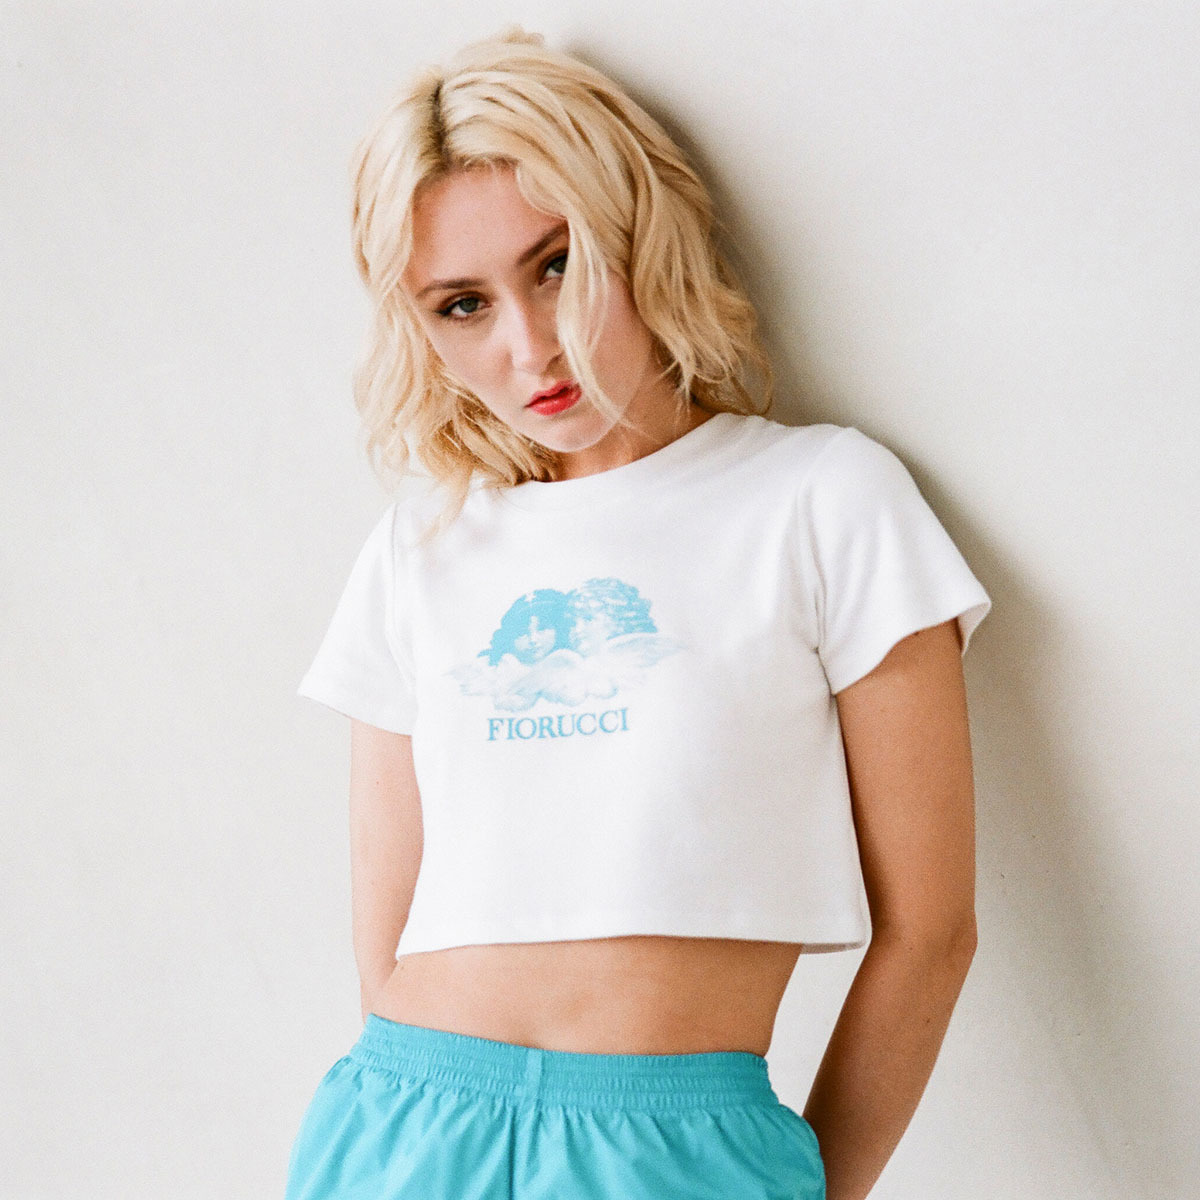 HBX X Fiorucci Just Launched A Summer Capsule And It’s Heaven On Earth